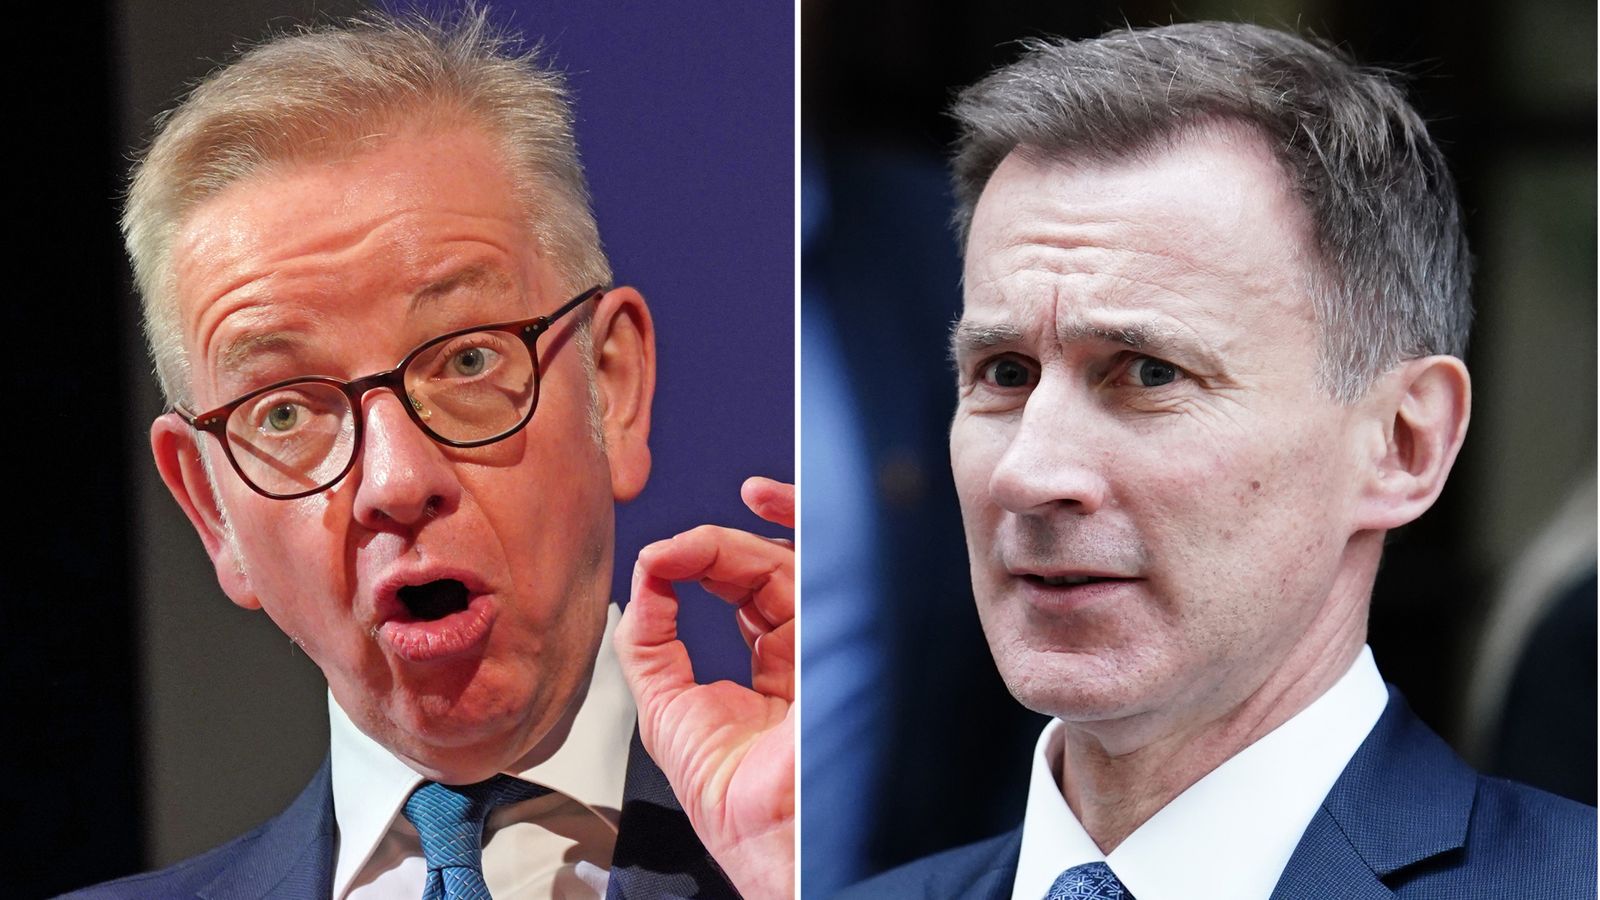 Michael Gove calls for tax cut ahead of next election - putting him at odds with Chancellor Jeremy Hunt